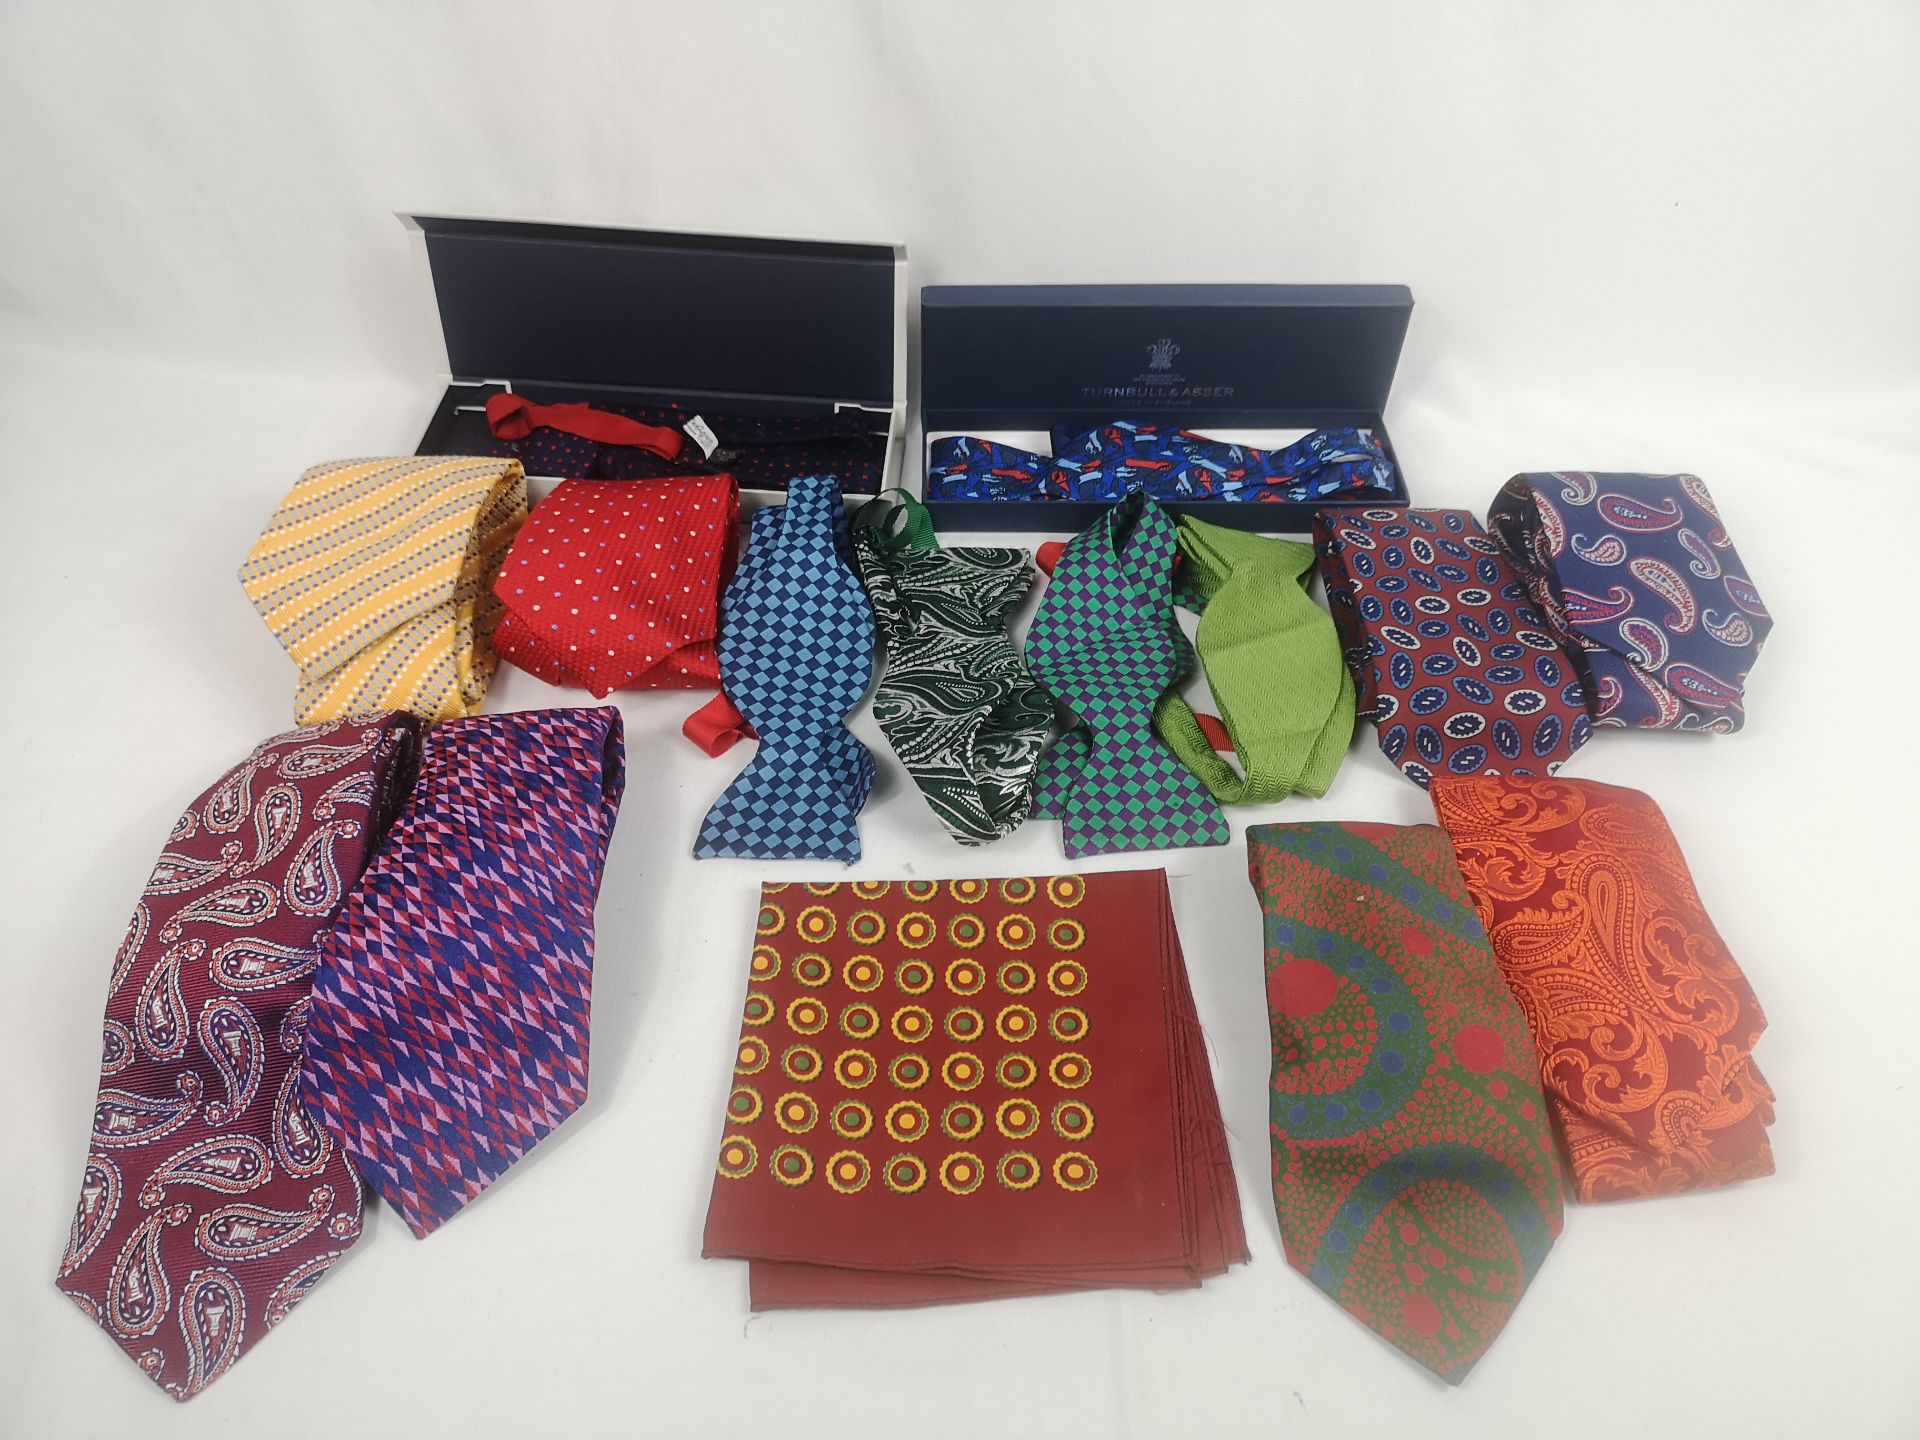 Eight Turnbull and Asser silk ties together with a quantity of Turnbull and Asser bow ties